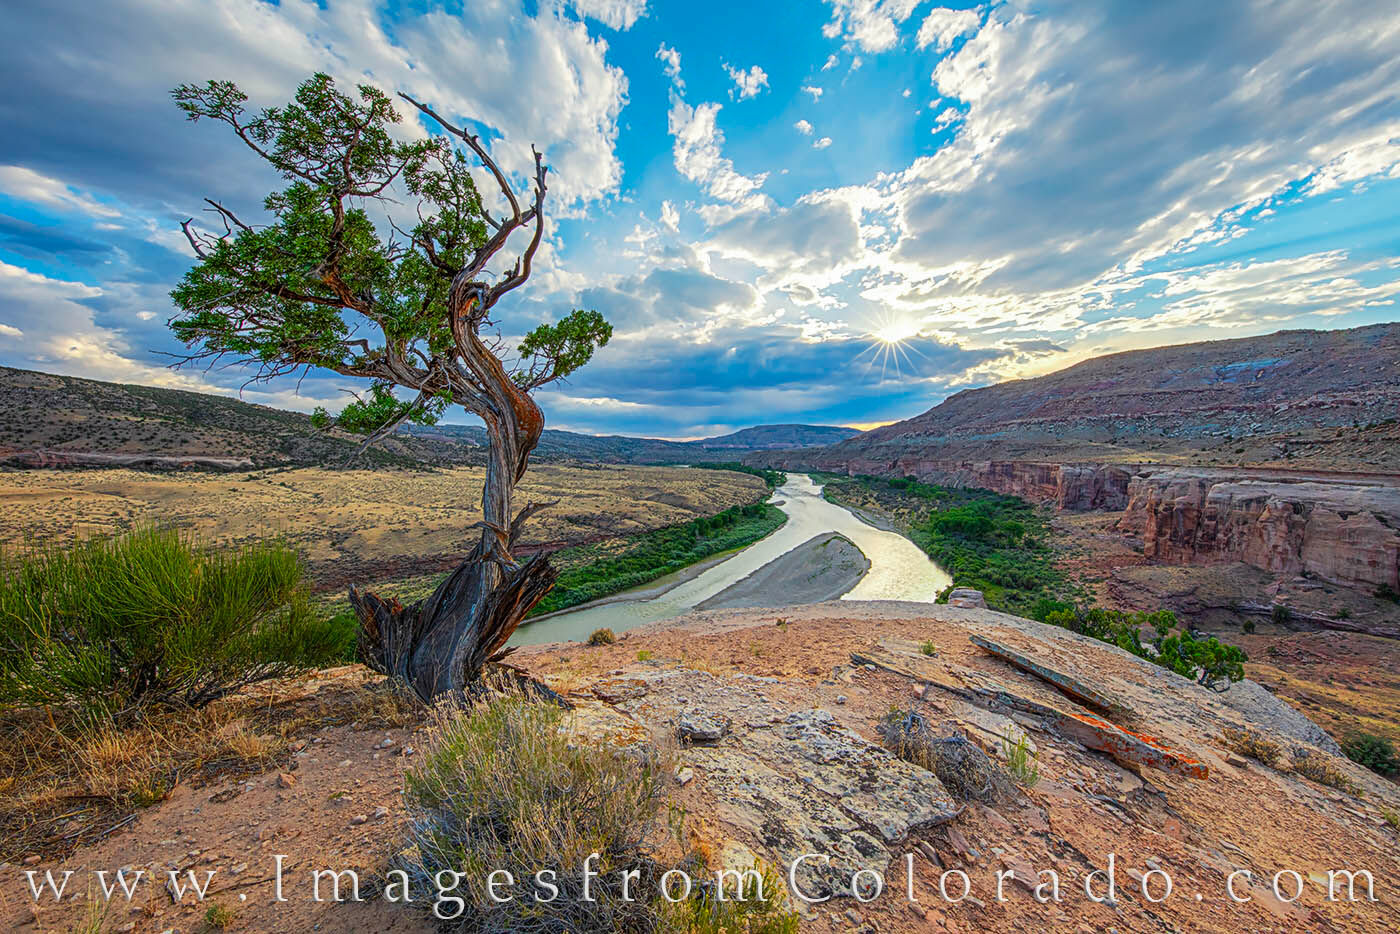 Colorado River sunset from an overlook along the Kokopelli Trail is a beautiful thing to take in. This view overlooking the canyon...